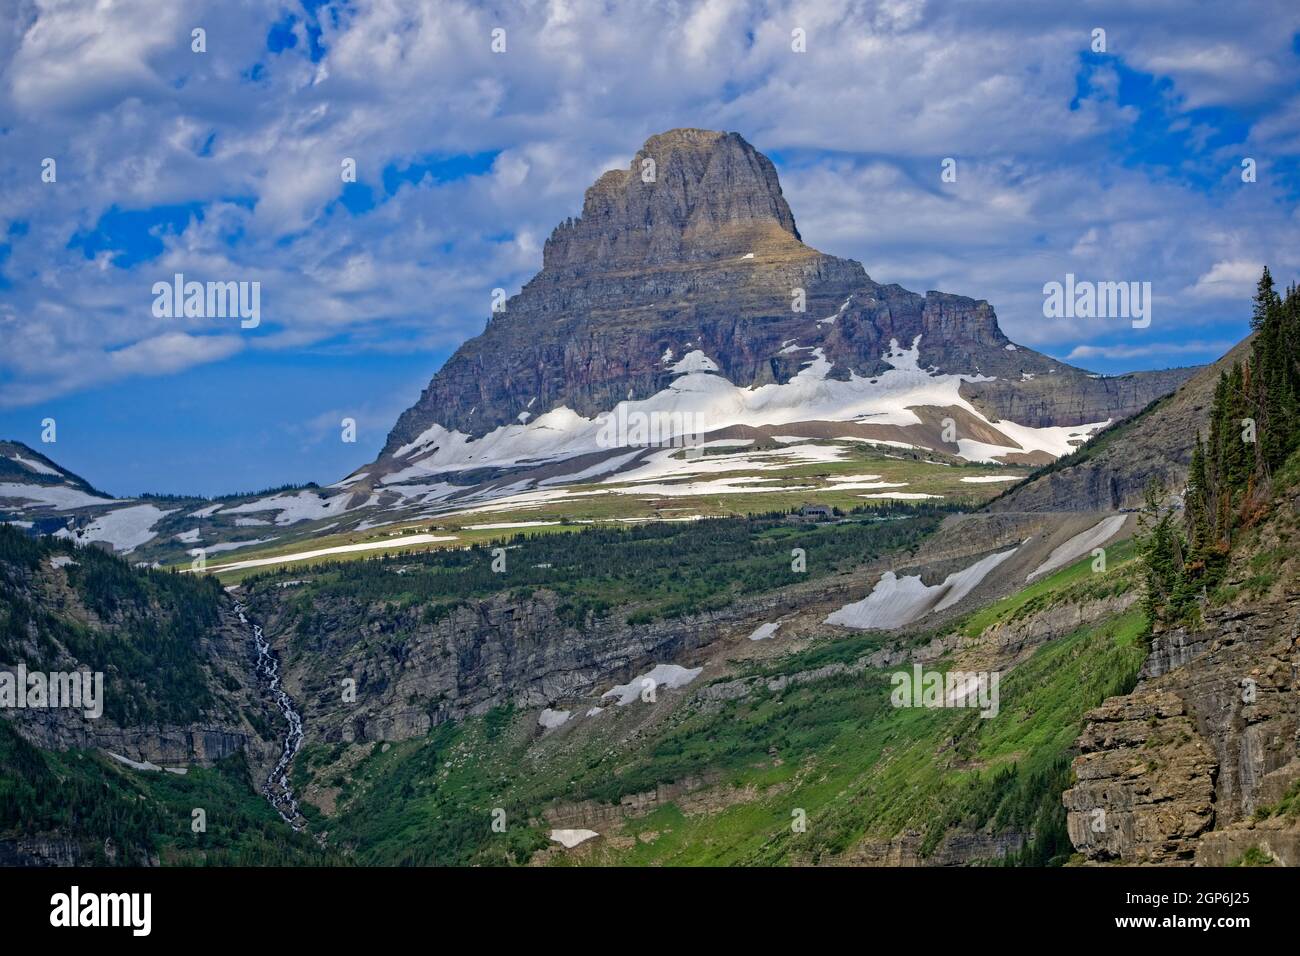 Majestic Clements - A nice view of Clements mountain in Glacier National Park Stock Photo